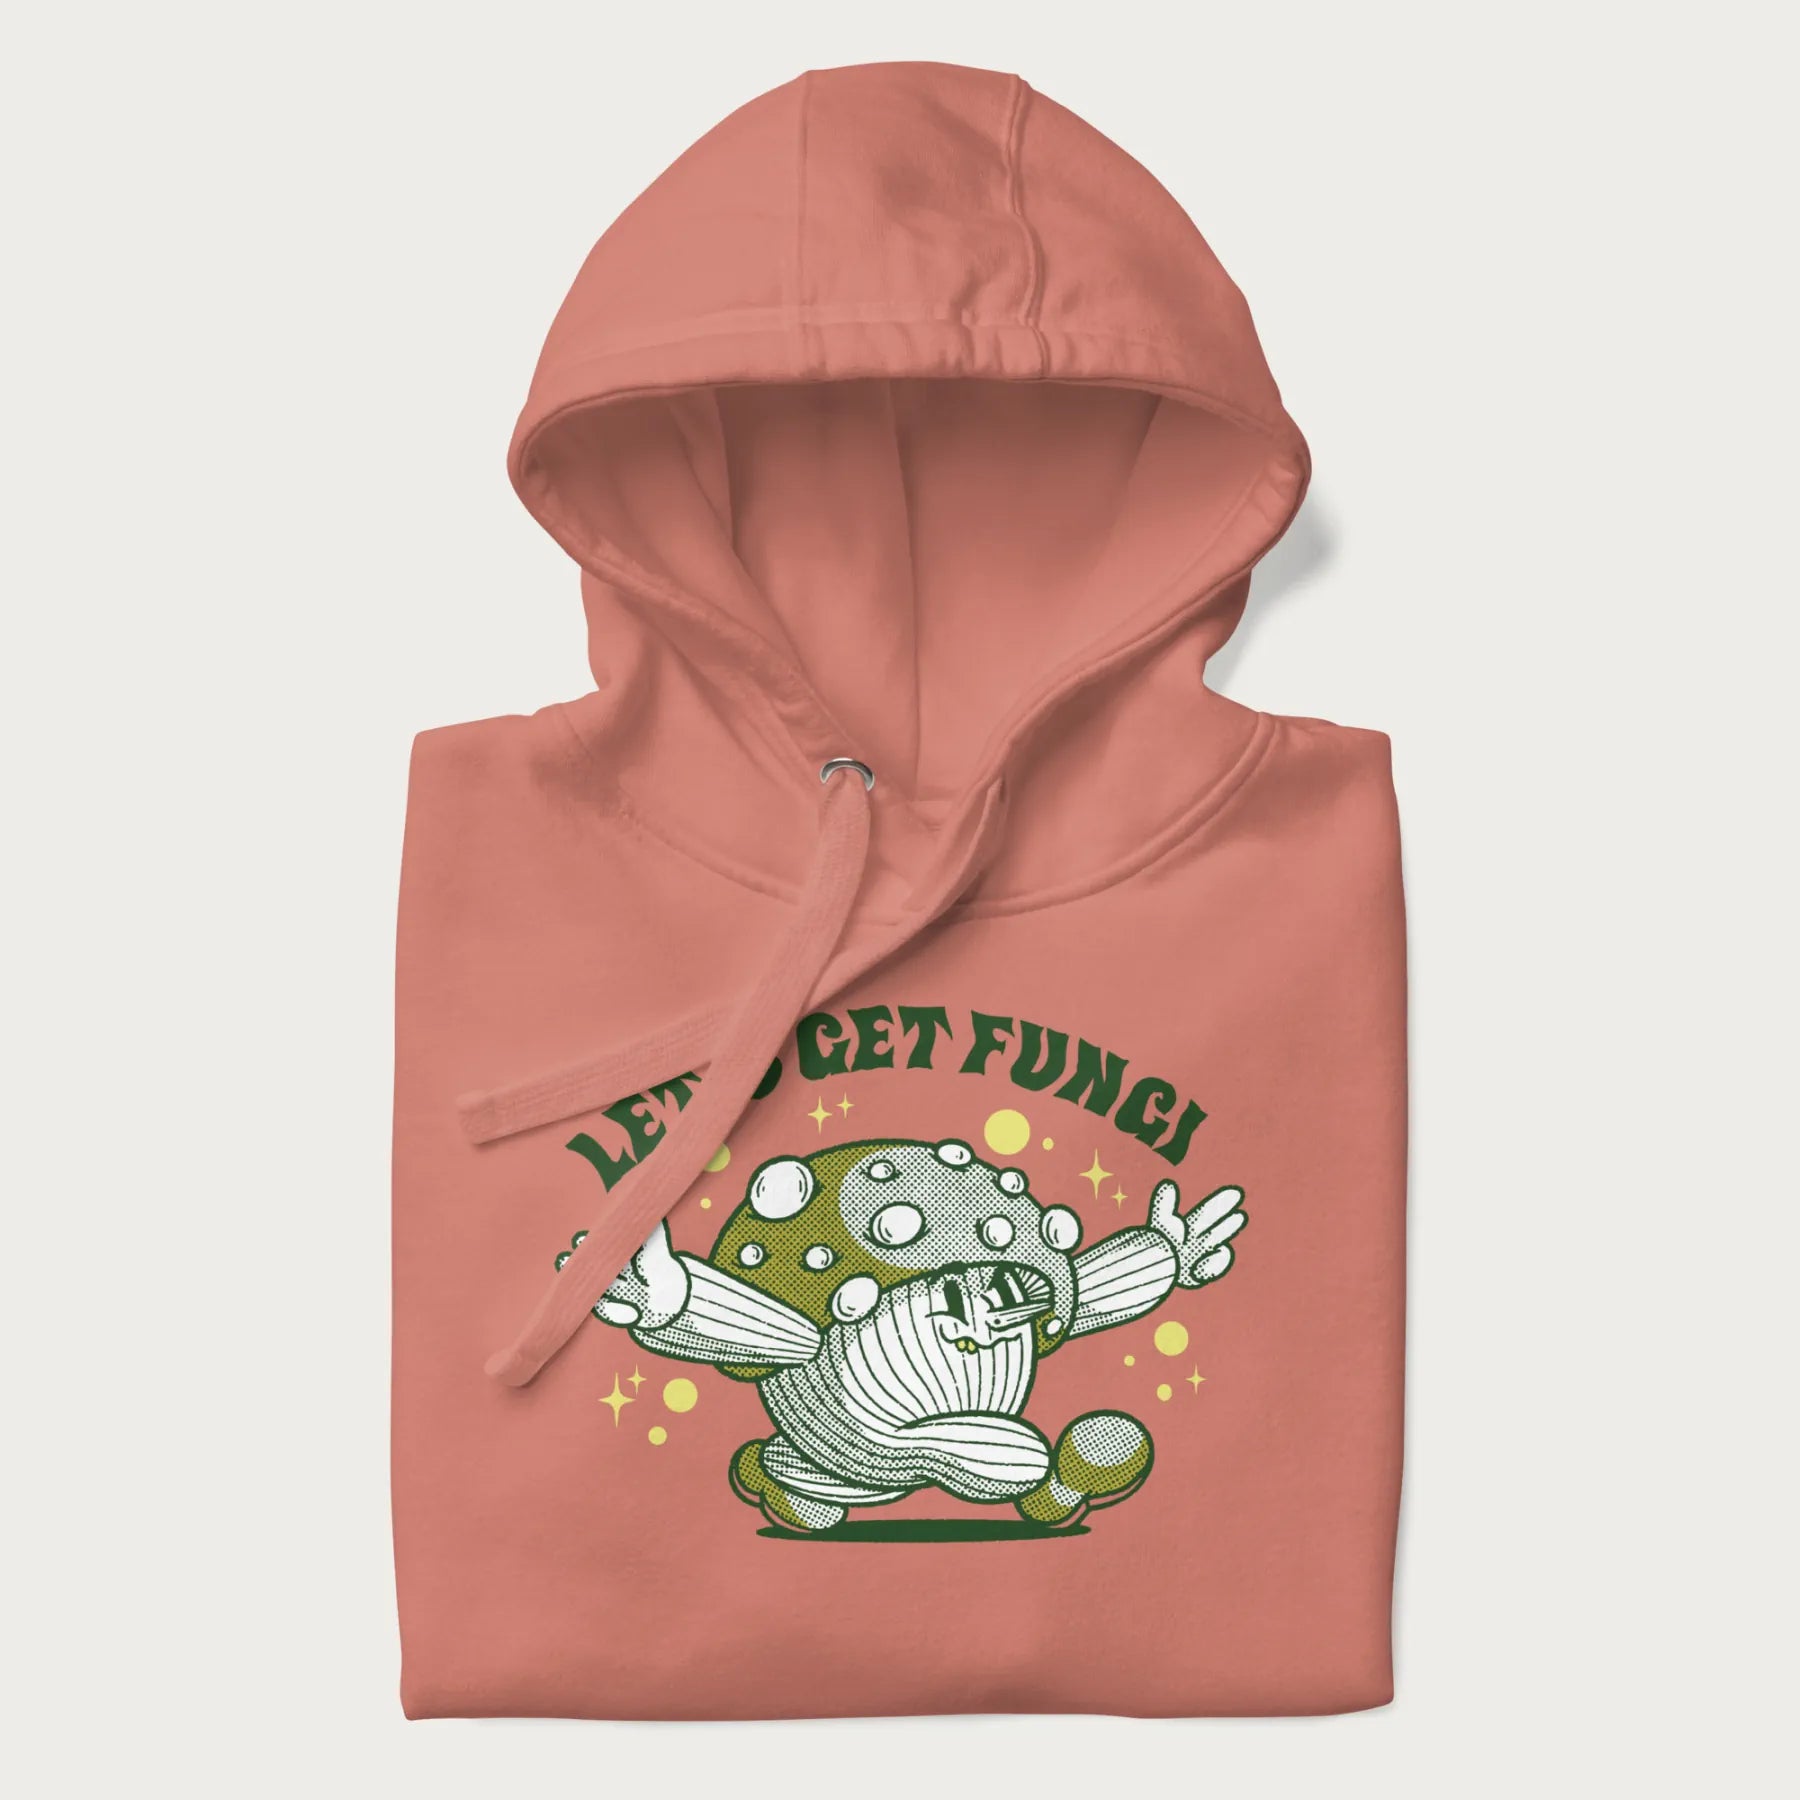 Folded light pink hoodie with a retro-inspired graphic of a mushroom mascot character and the text 'Let's Get Fungi'.